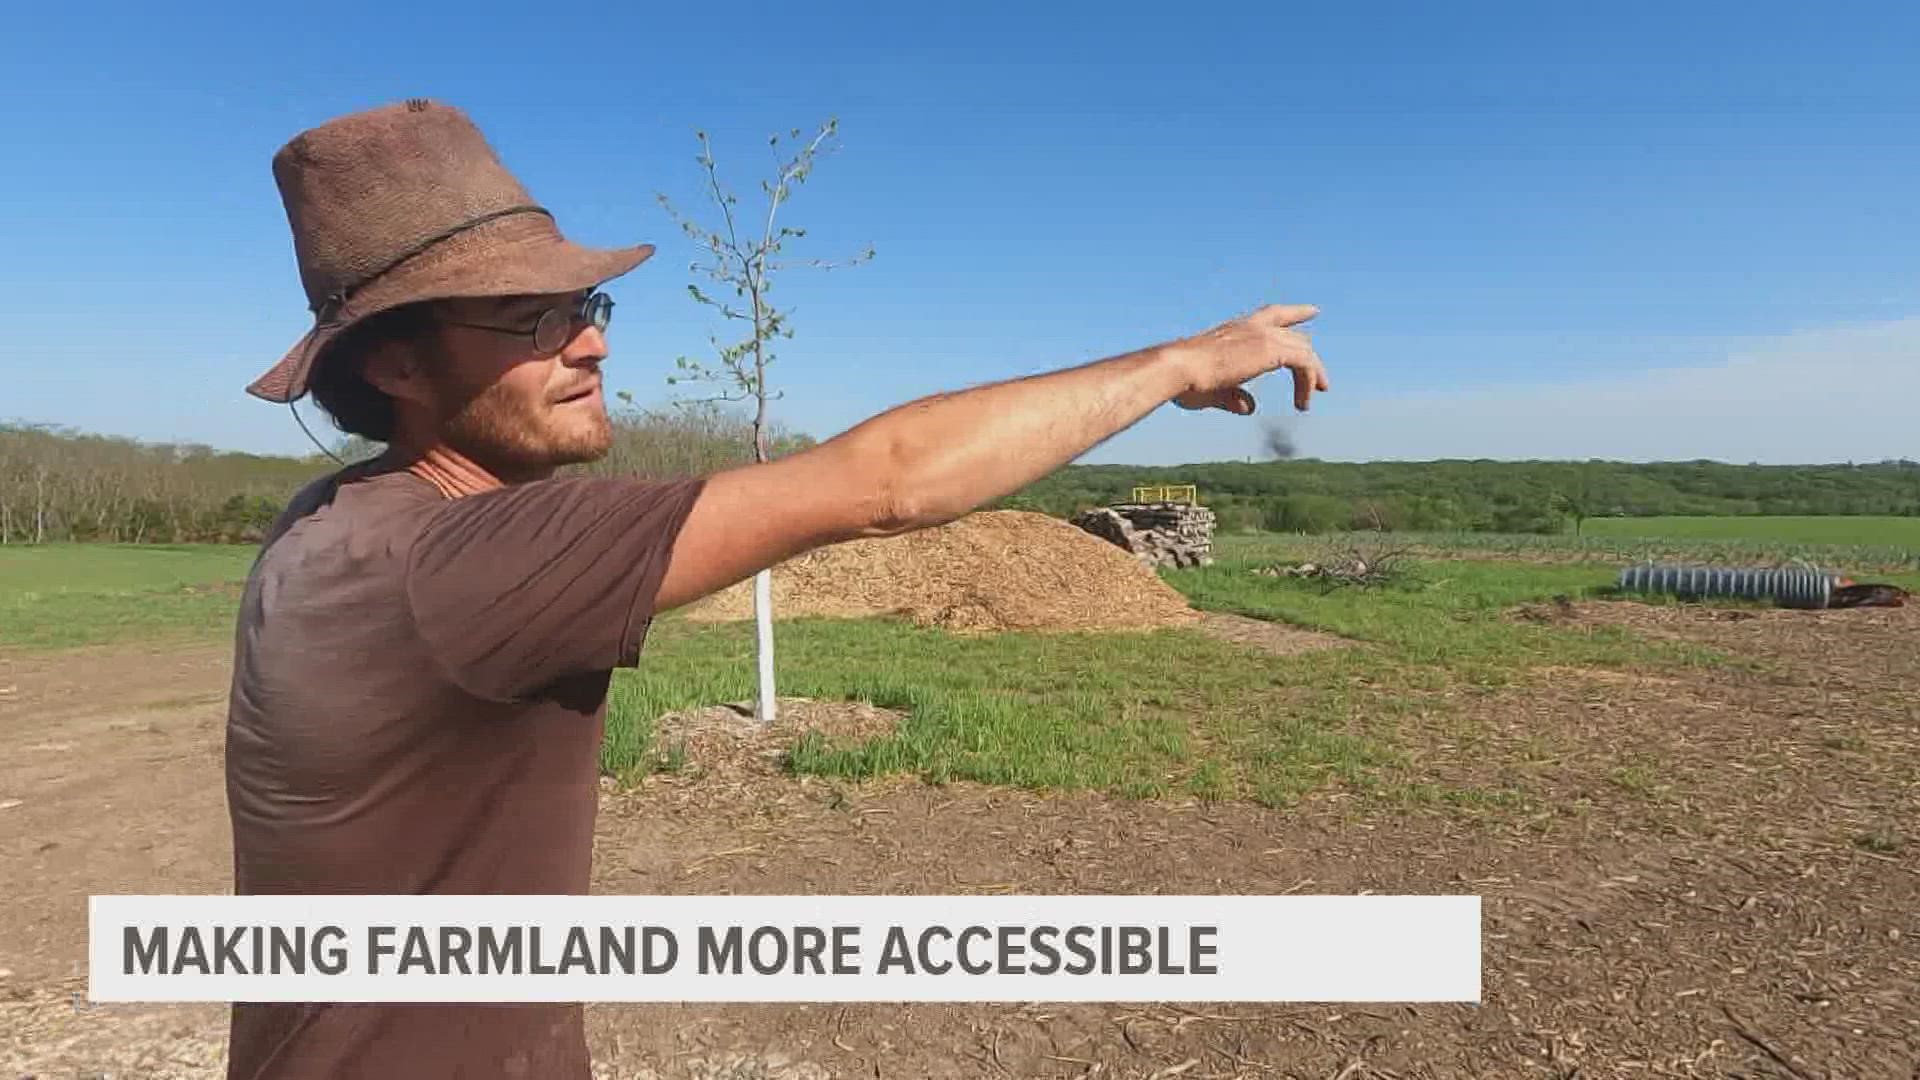 The Sustainable Iowa Land Trust (SILT) says the economy and rising land values have made some farmers reluctant to donate their land.